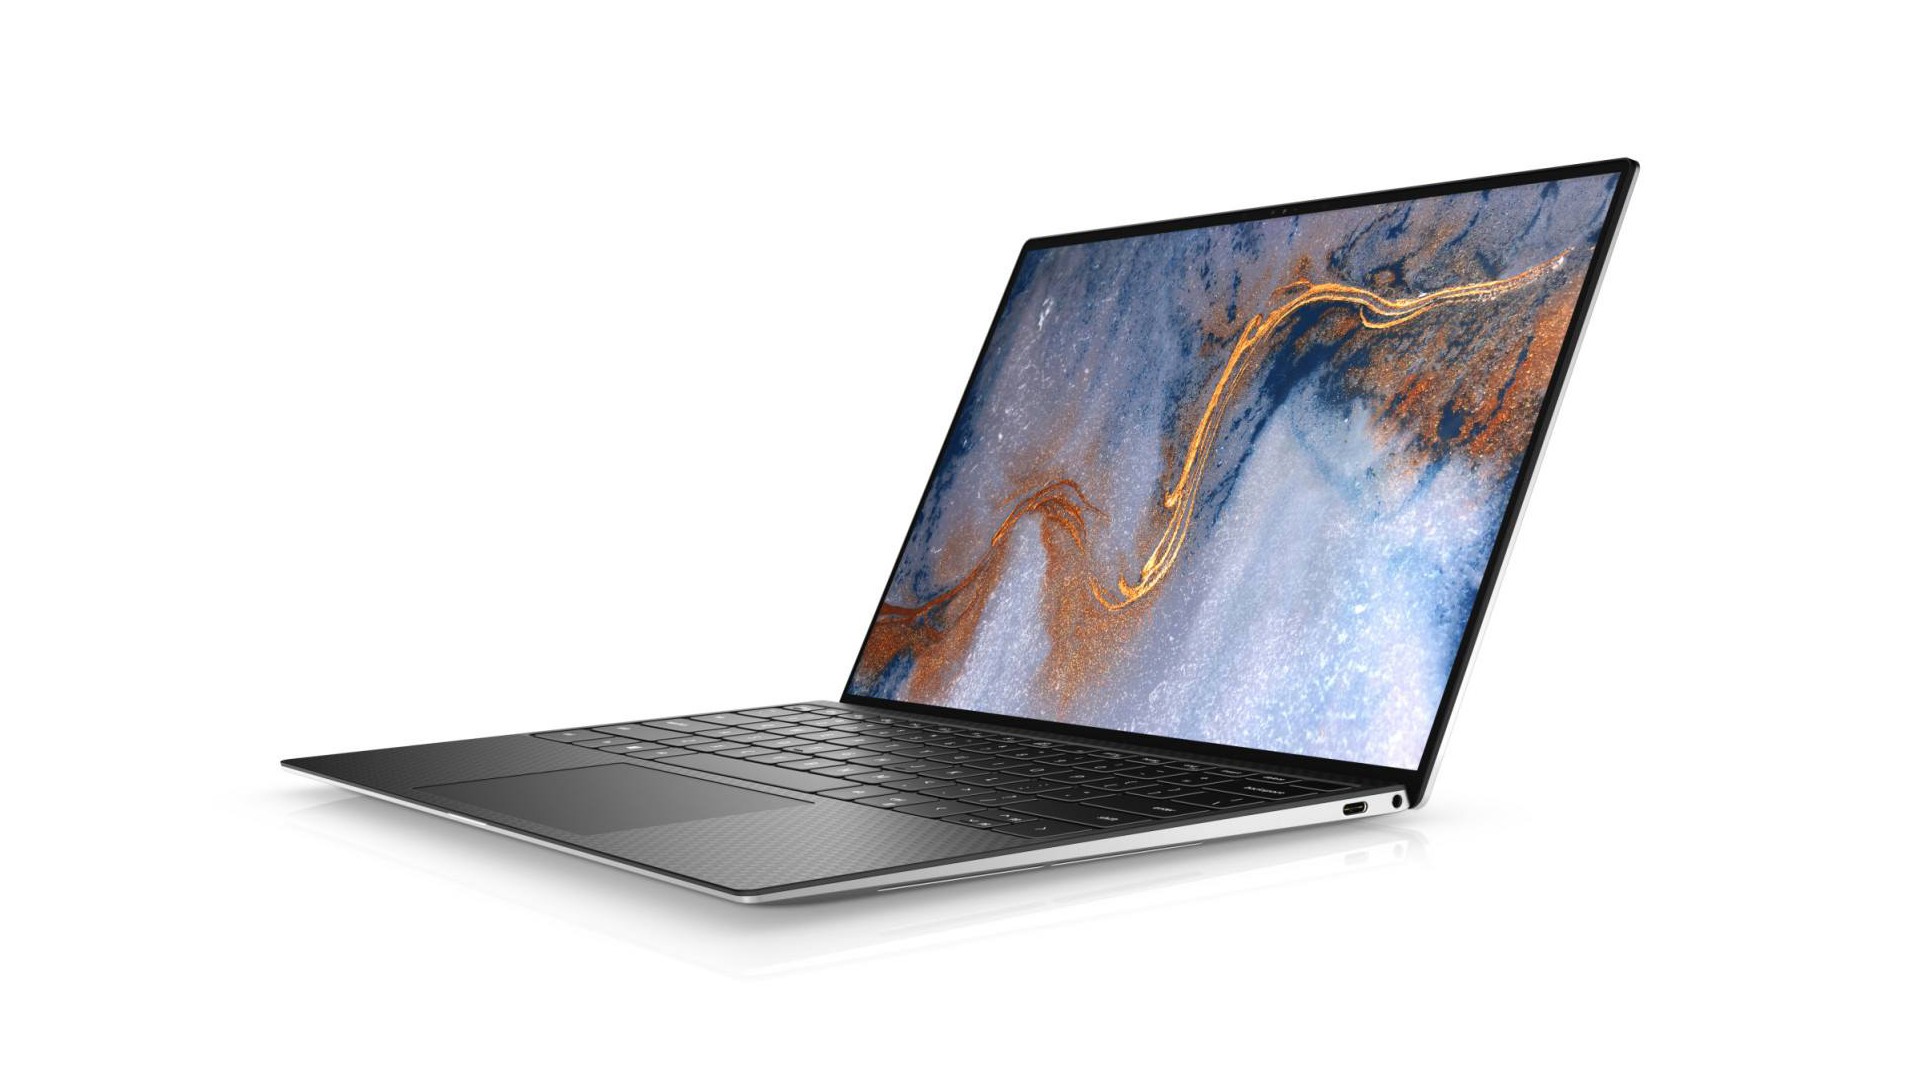 Dell's XPS 13 (2020) takes Skinny